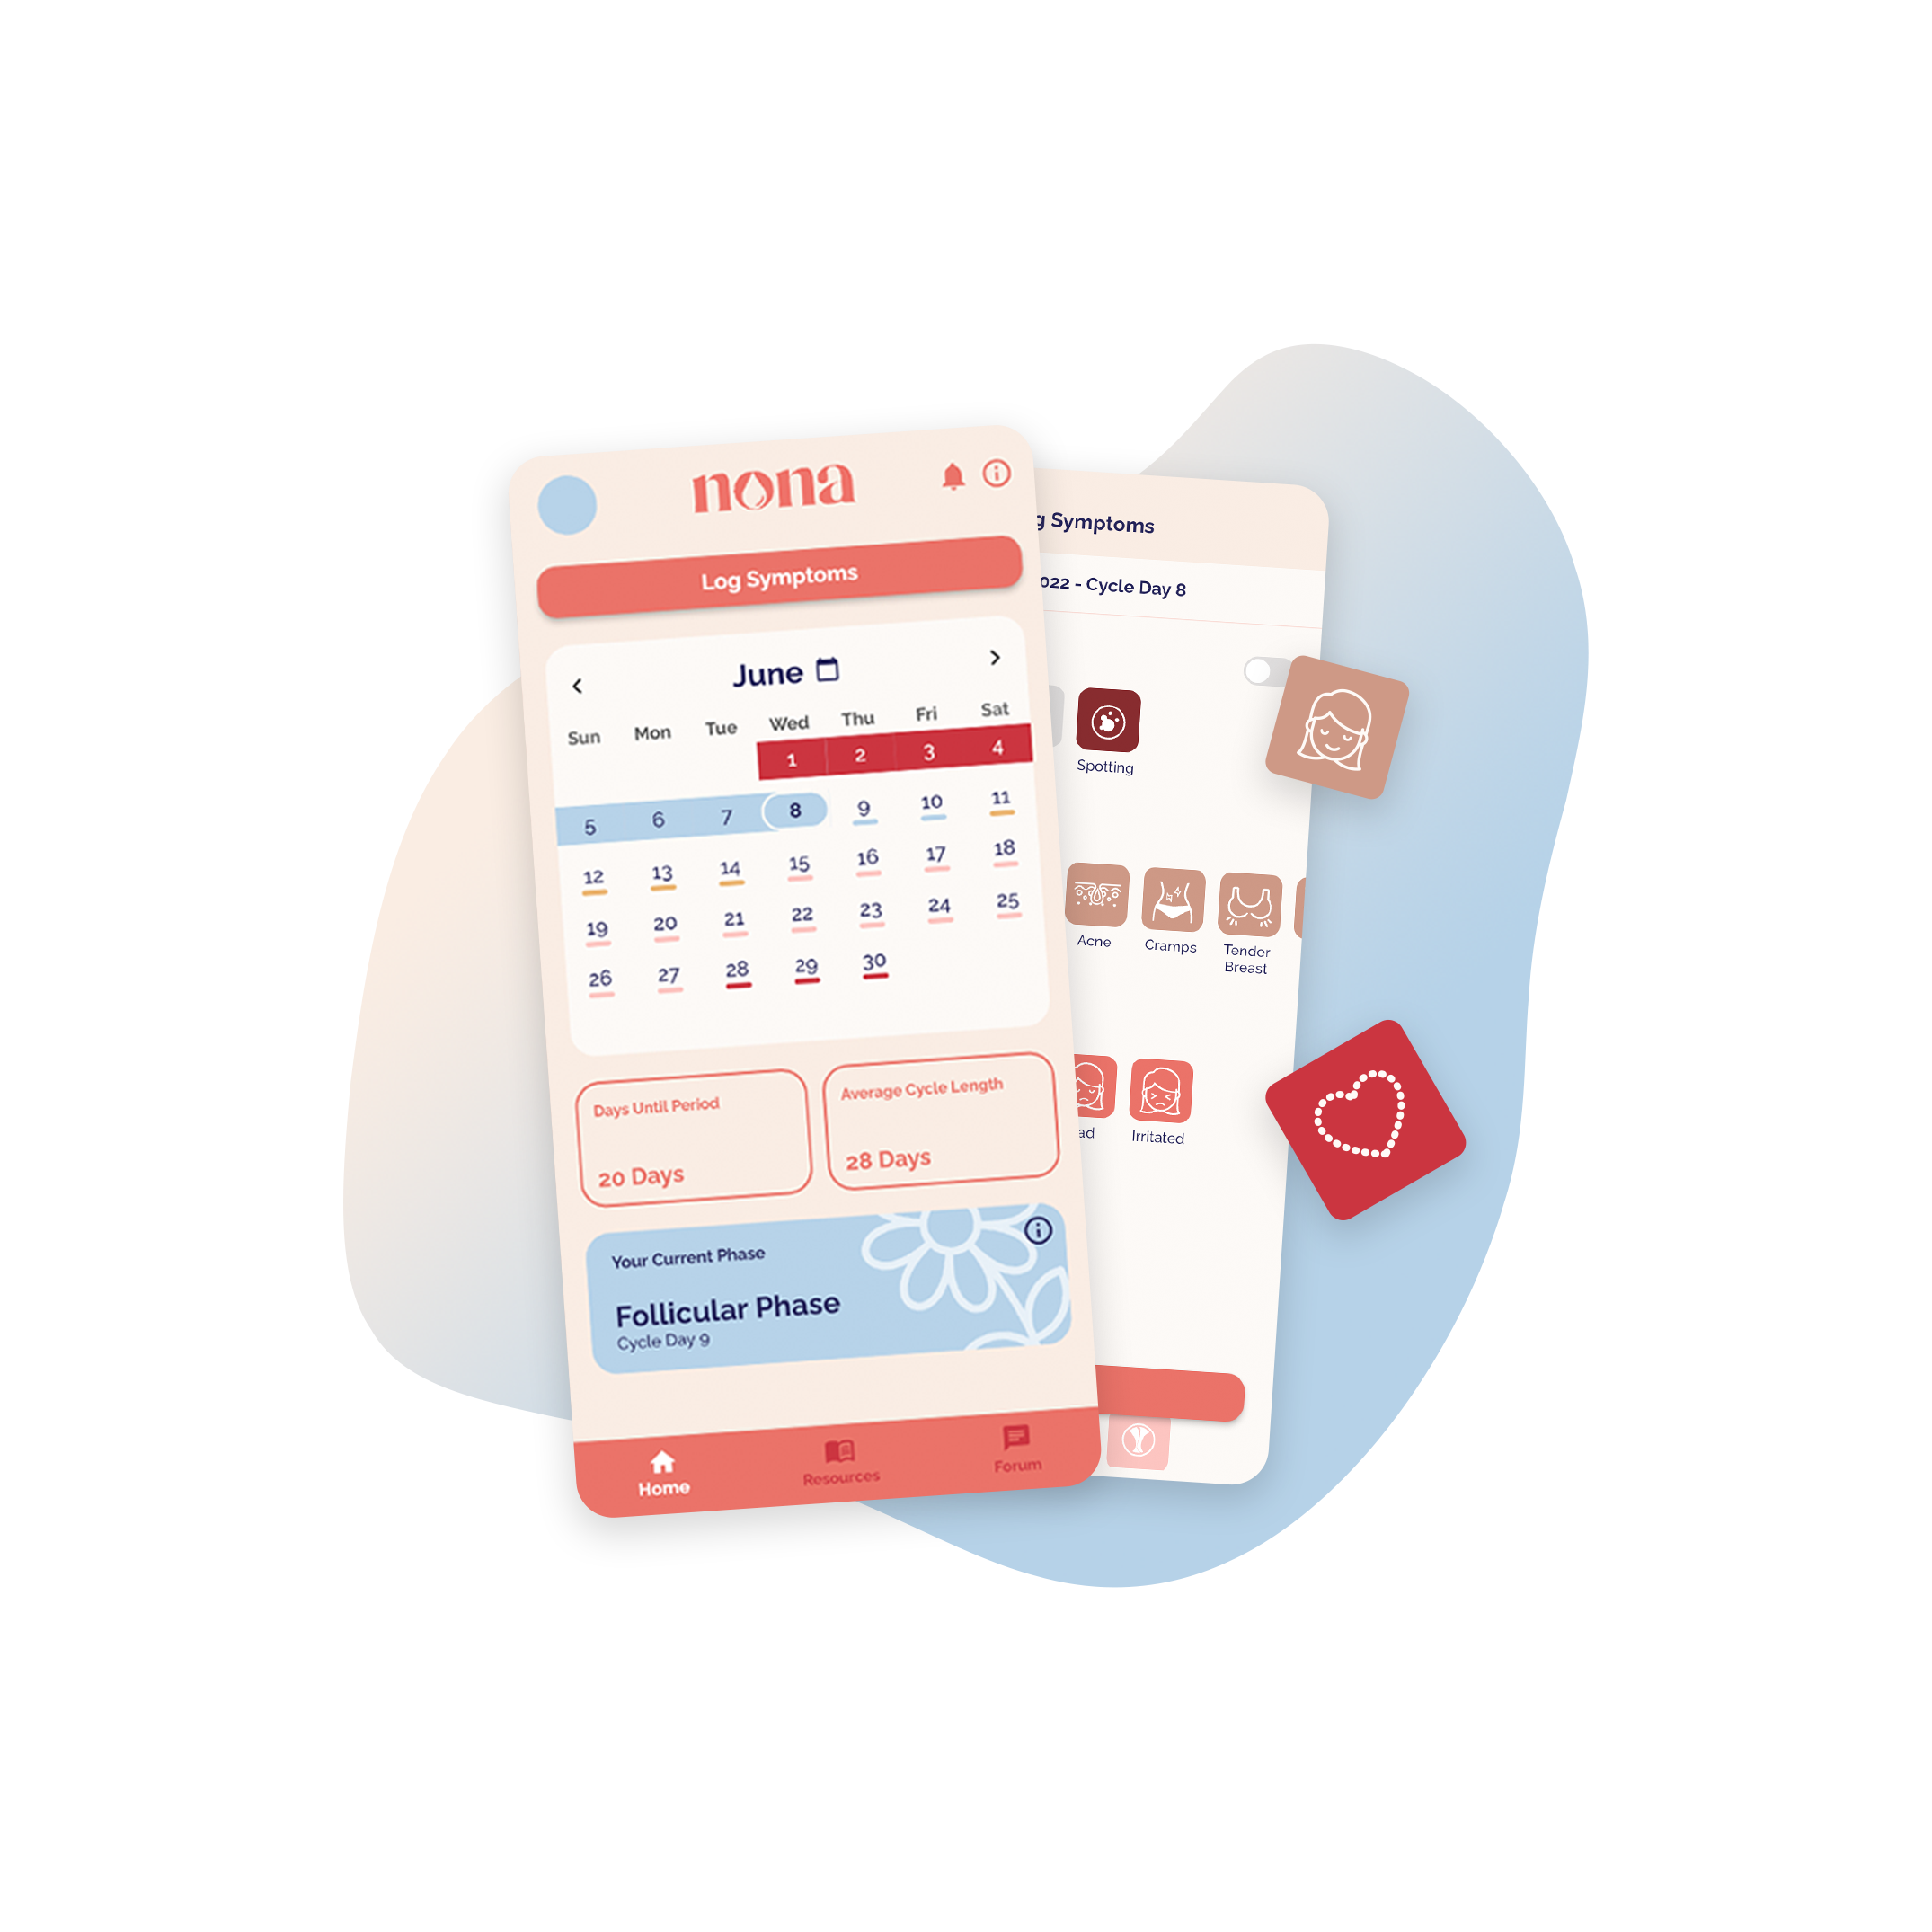 Period tracker apps by Nona Woman